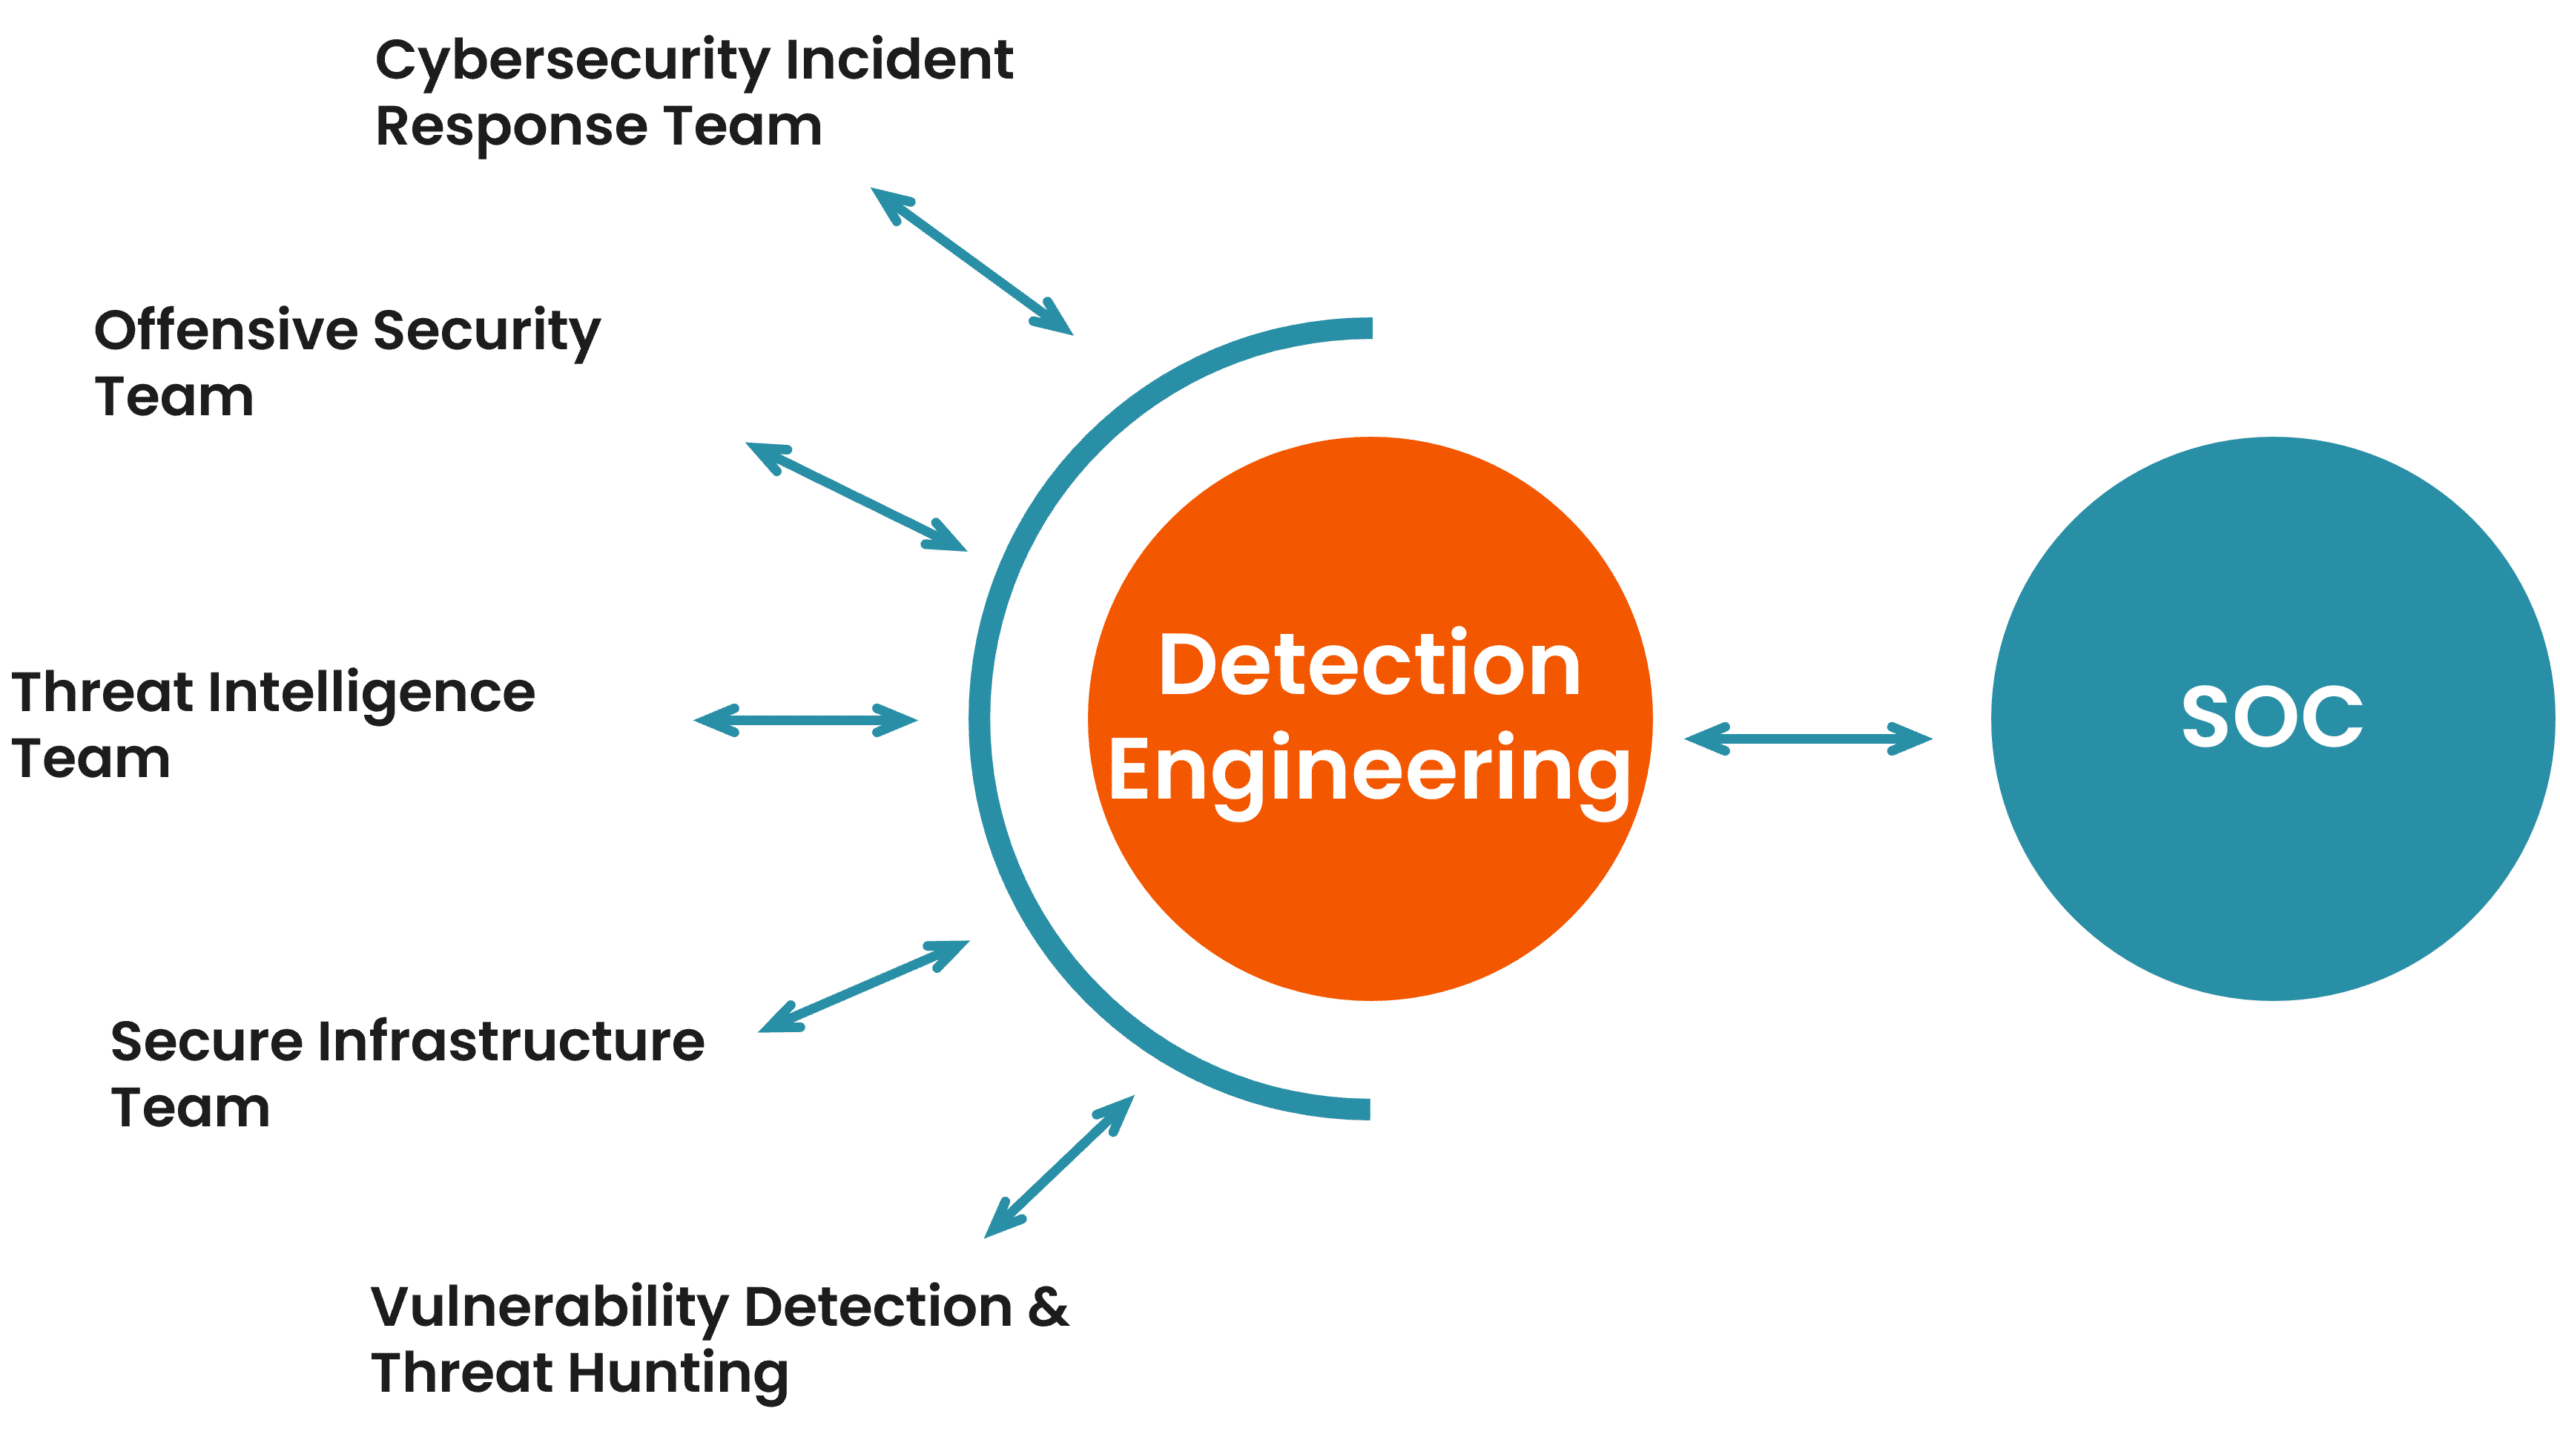 Illustration of the flow of information from Cybersecurity Incident Response team, the Offensive Security Team, the Threat Intelligence team, the Secure Infrastructure team, and the Culnerability Detection & Threat Hunting team to the Detection Engineering team. That then also works together with the SOC. 